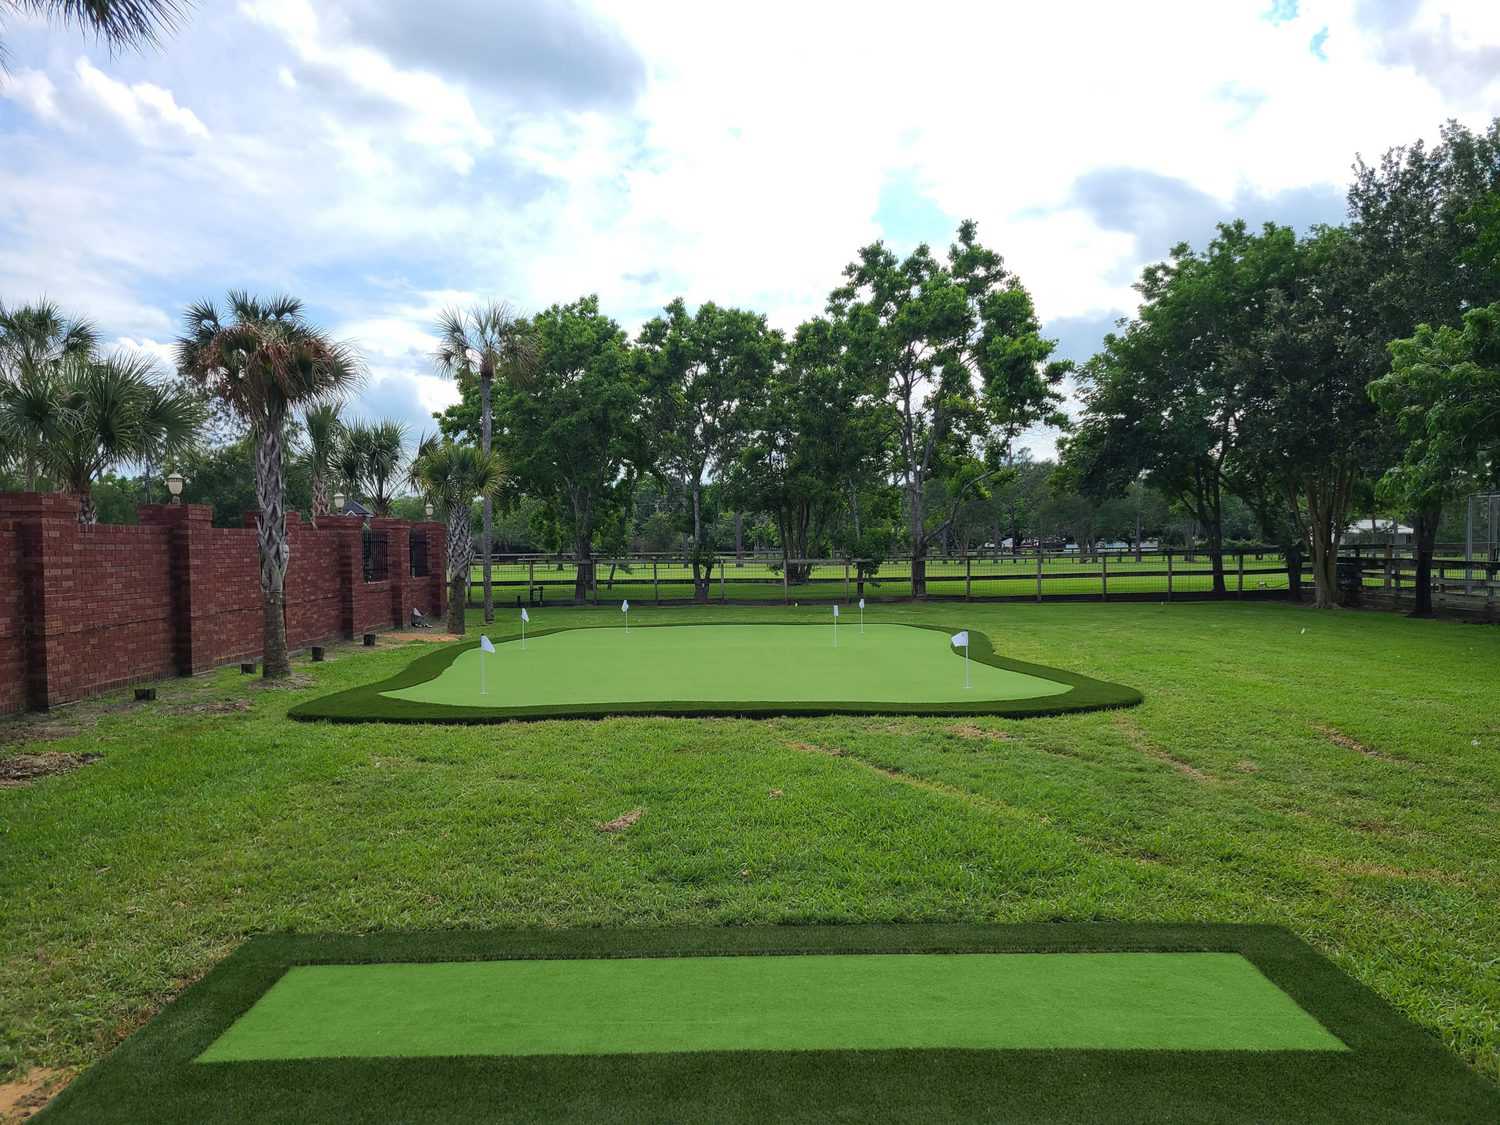 synthetic grass landscaping work done in Houston, Texas residence